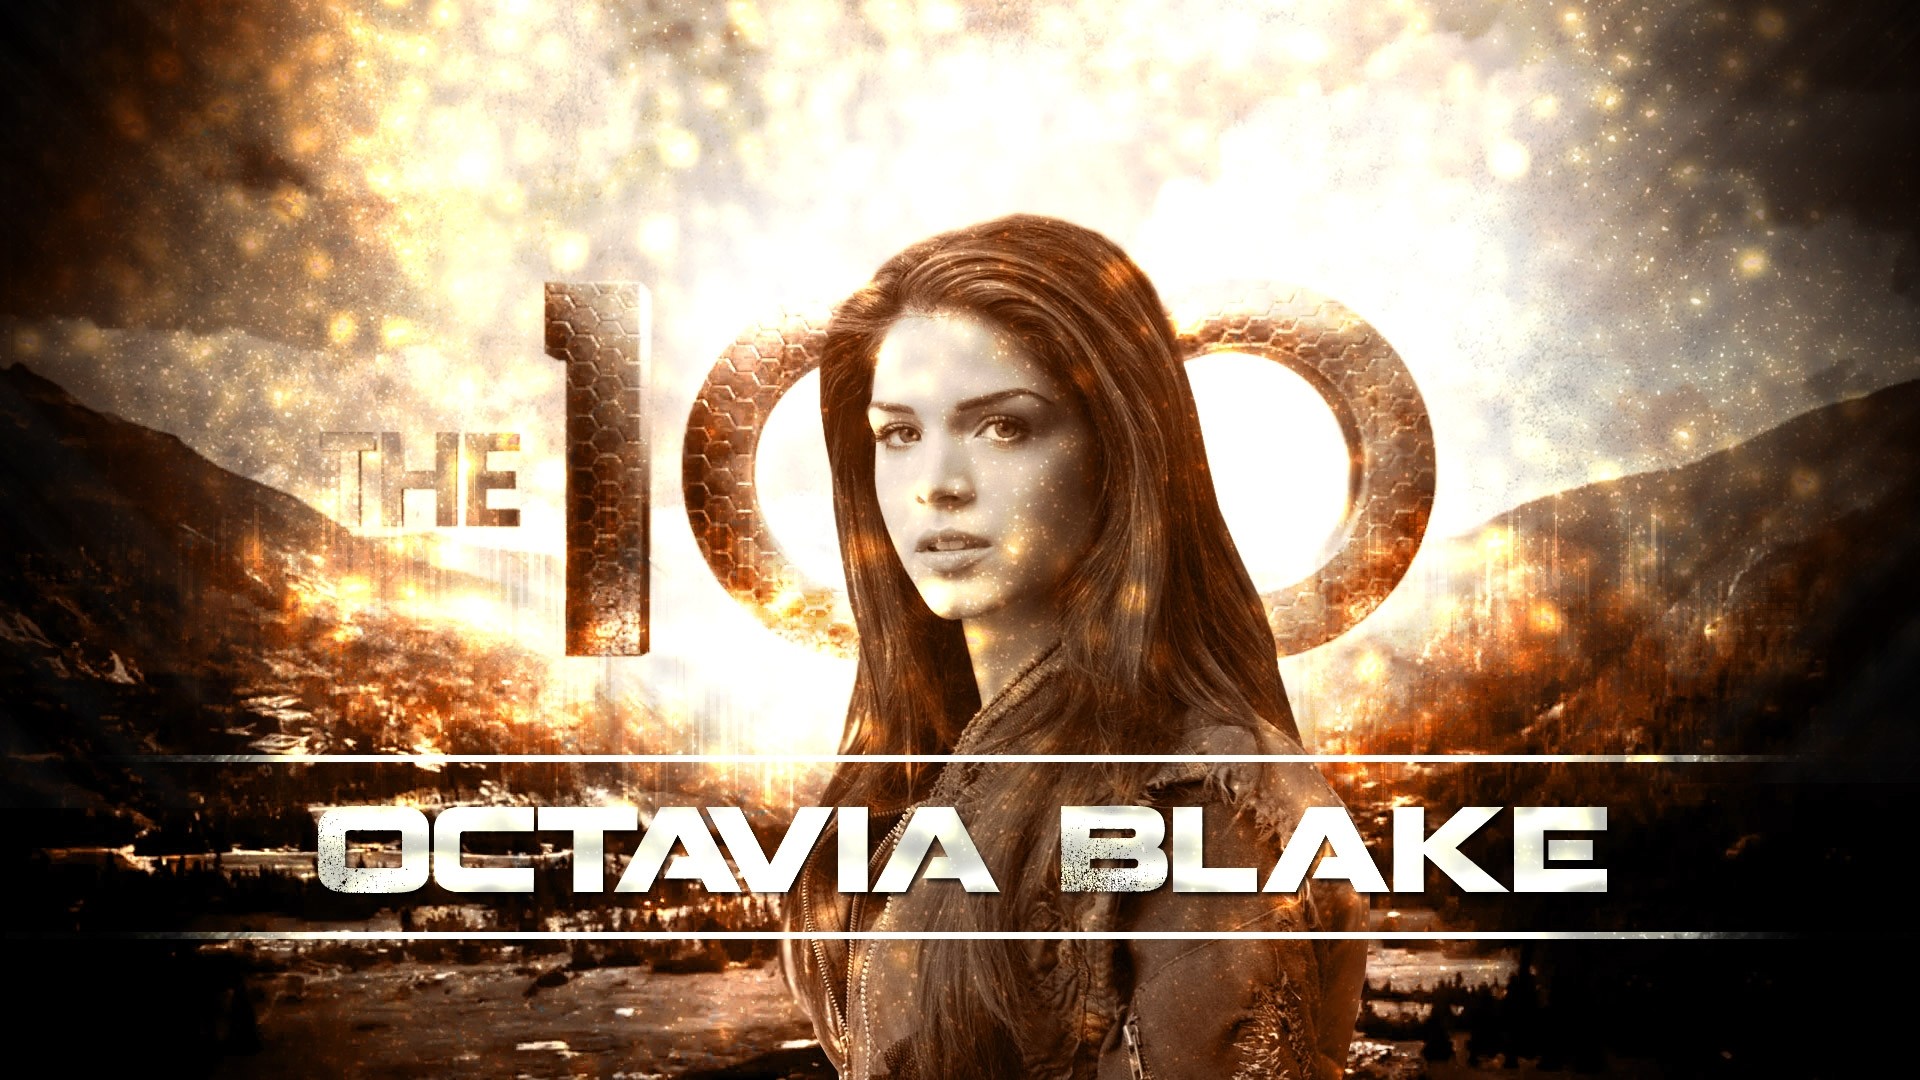 The 100 Hd Wallpapers